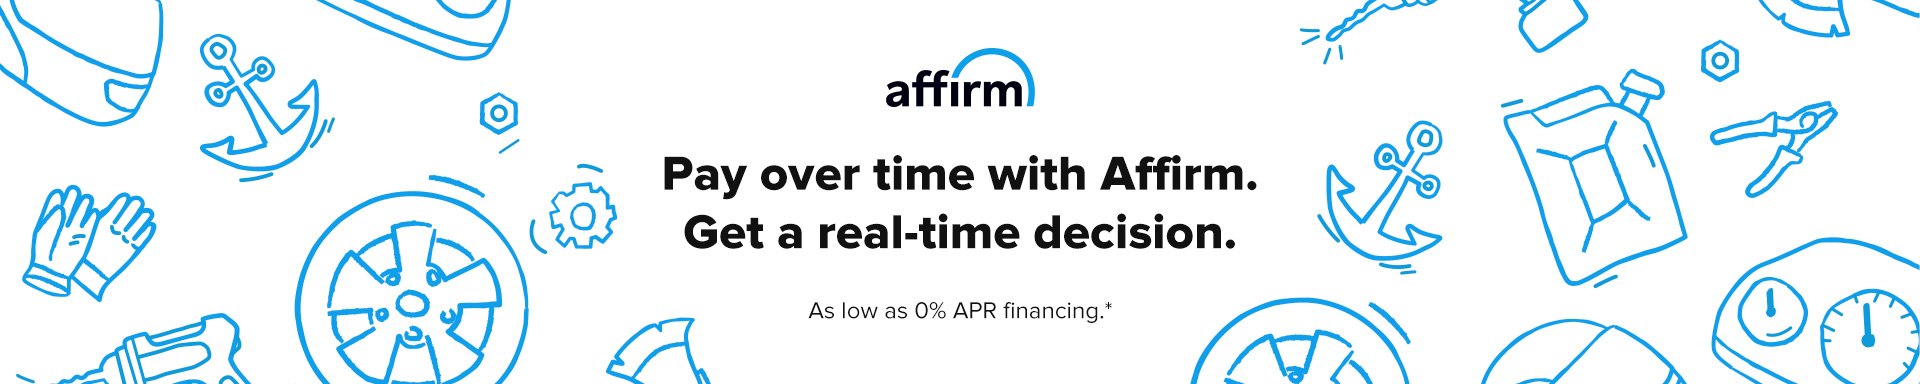 Affirm | Easy Financing | Pay Later with Affirm - TOOLSiD.com